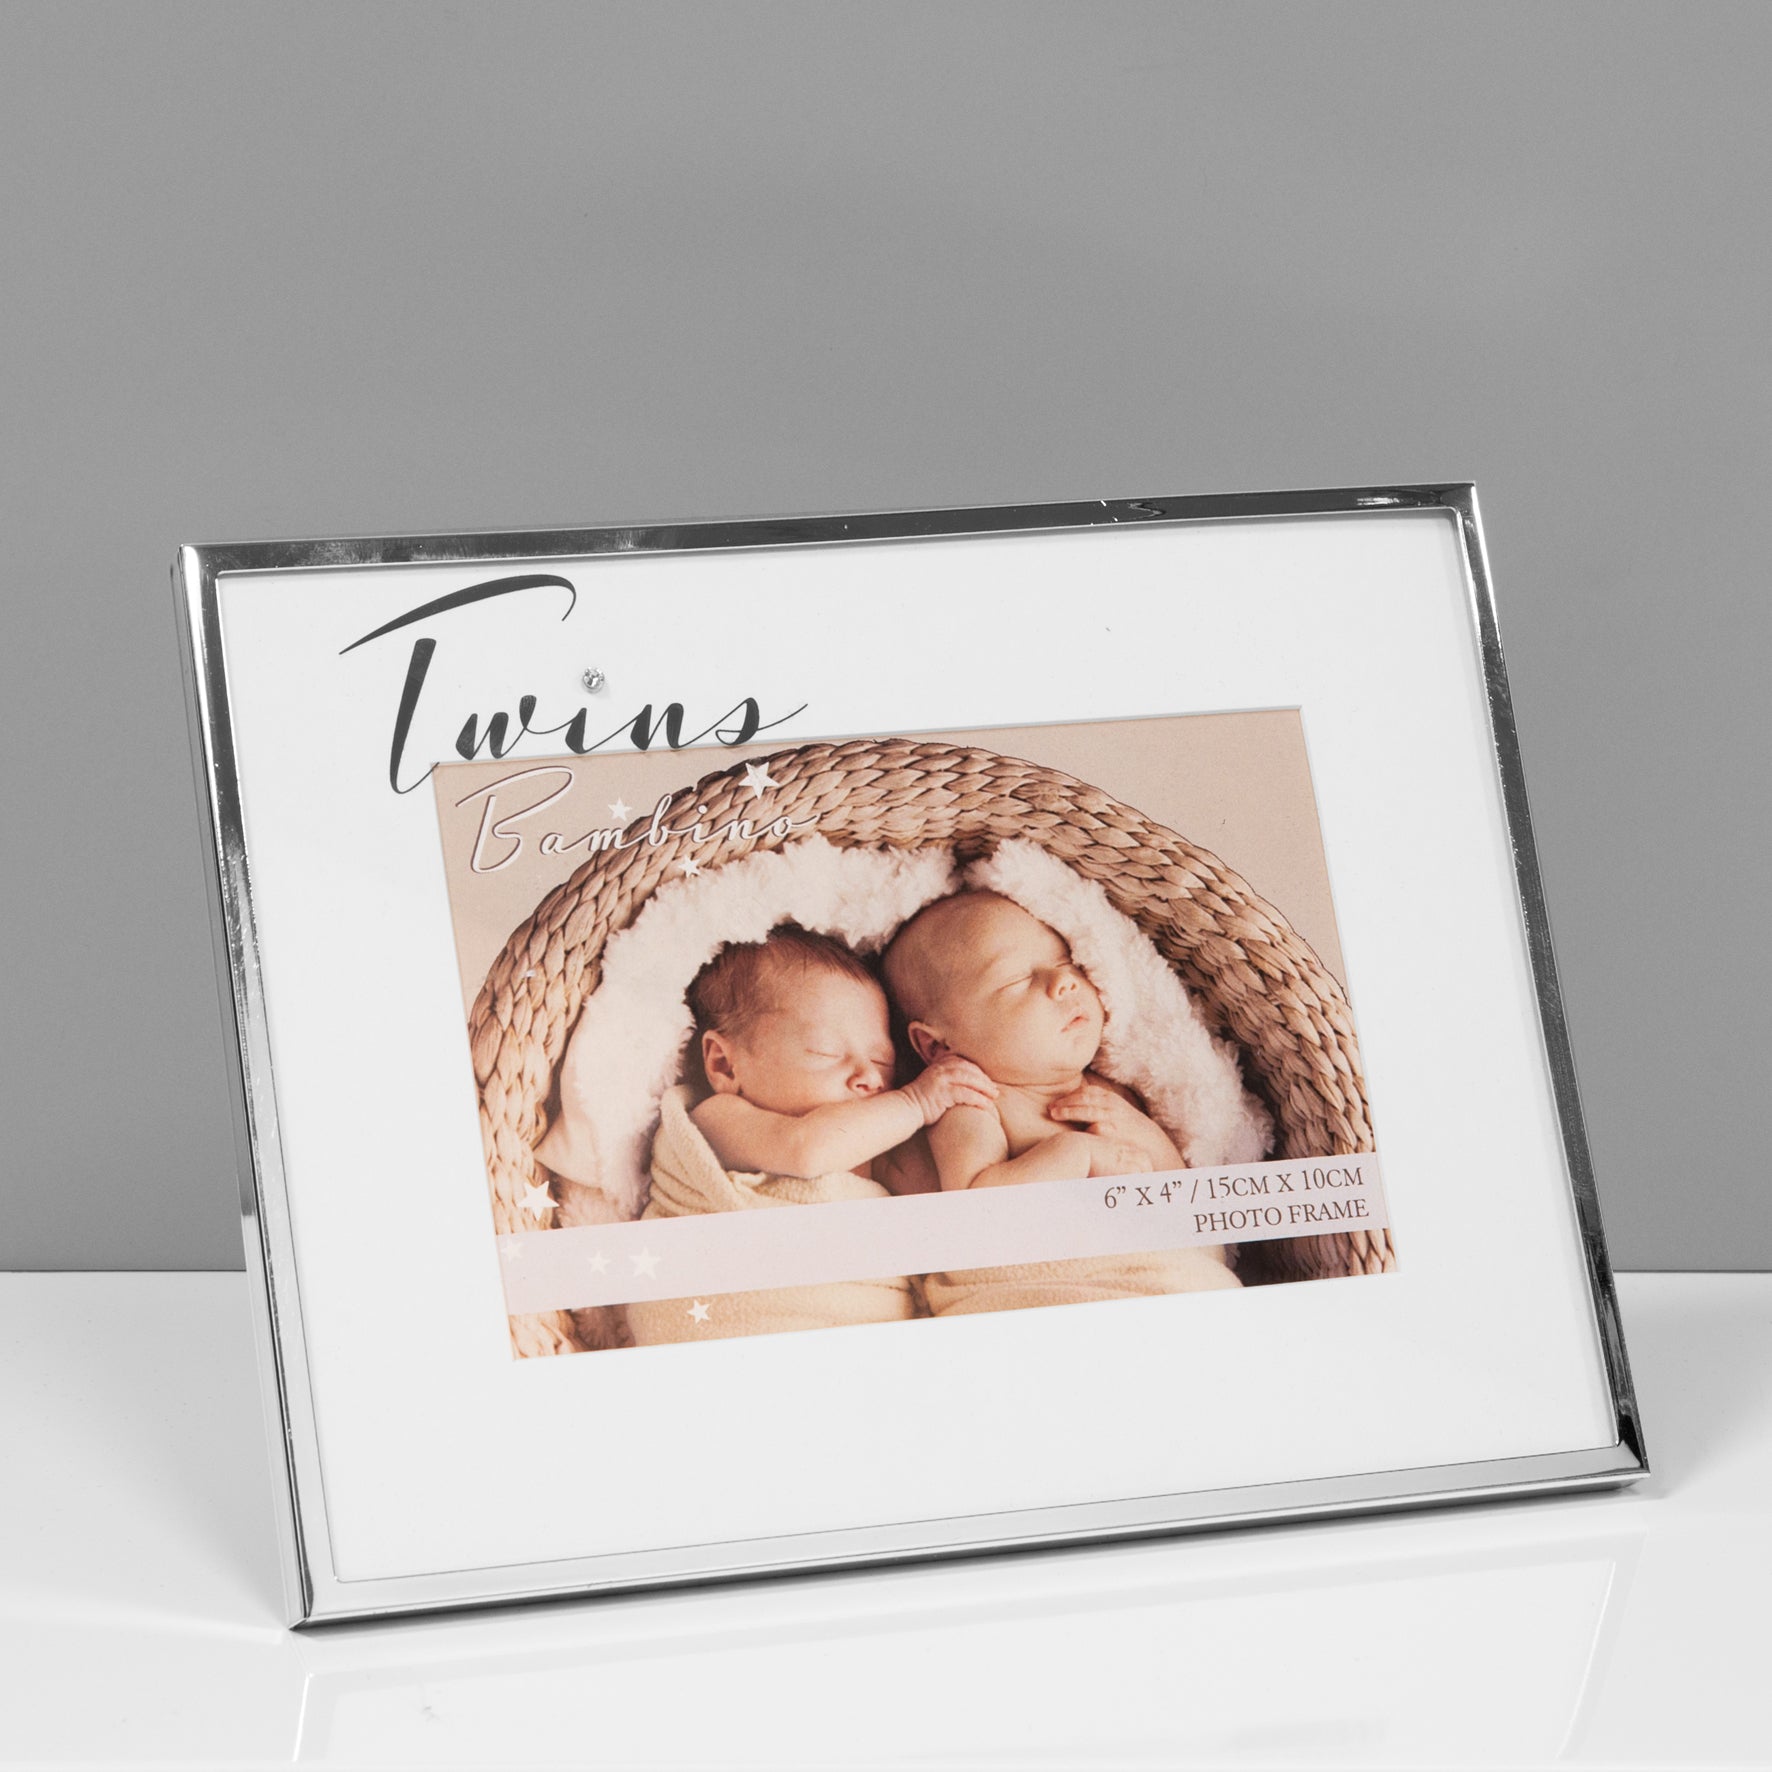 Twins Baby Photo Frame - Silver Plated - 6" x 4" Photo Aperture